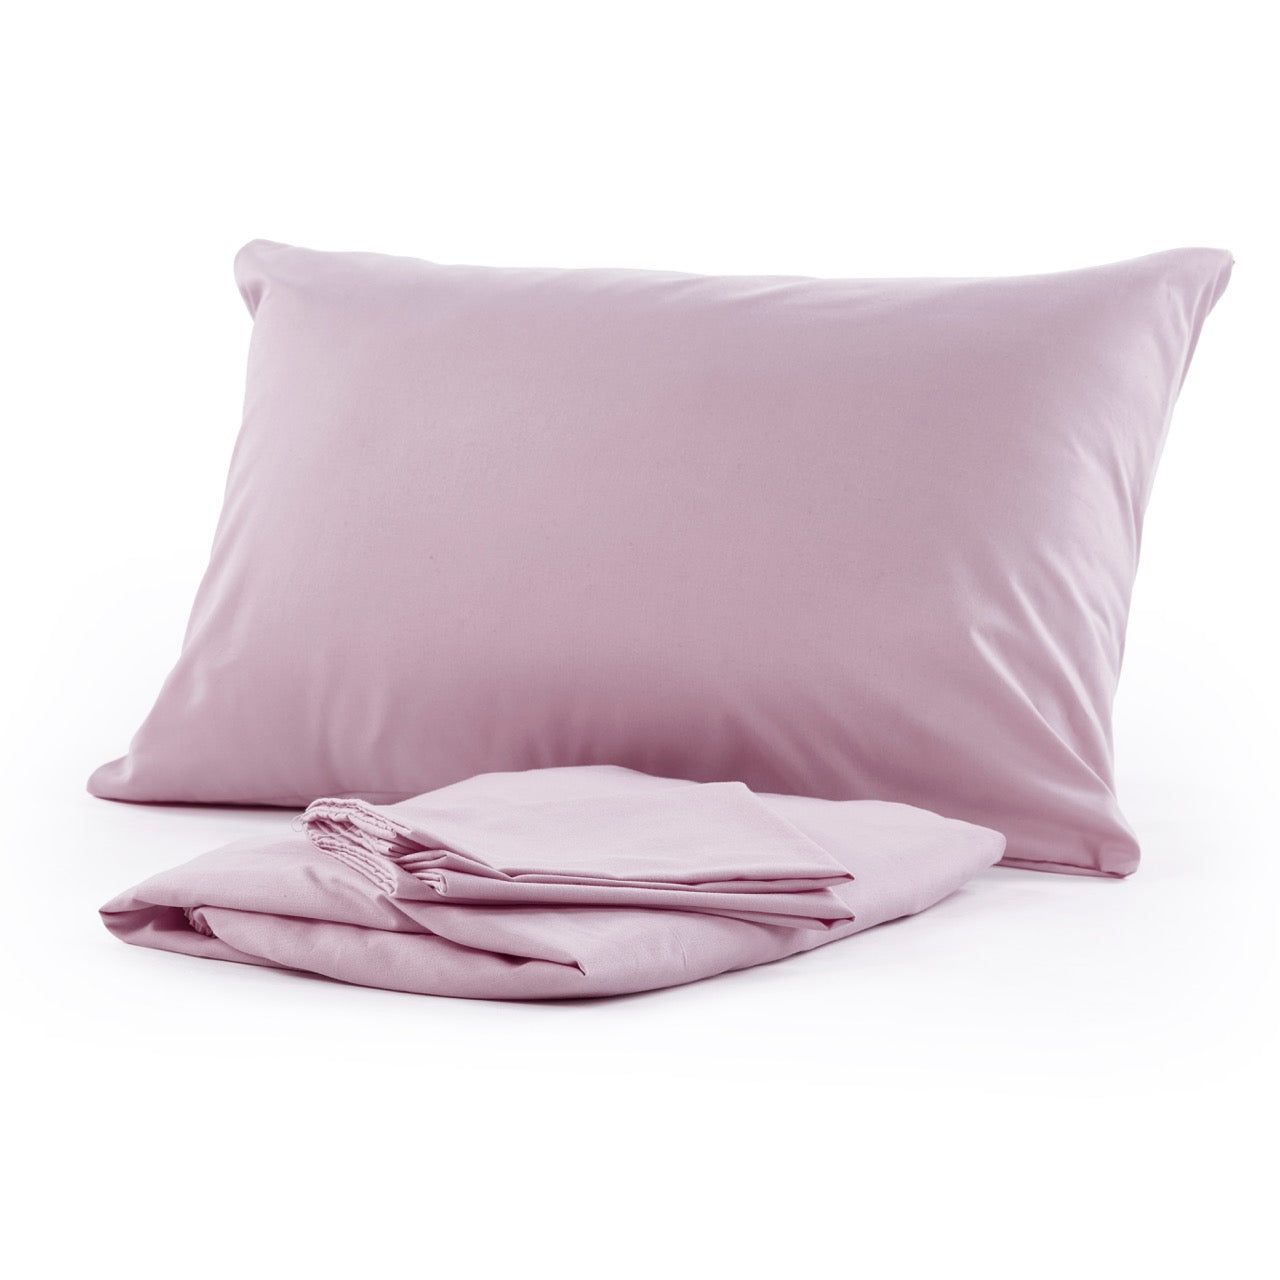 Ronjy- Fitted Cotton Bed Sheet Set